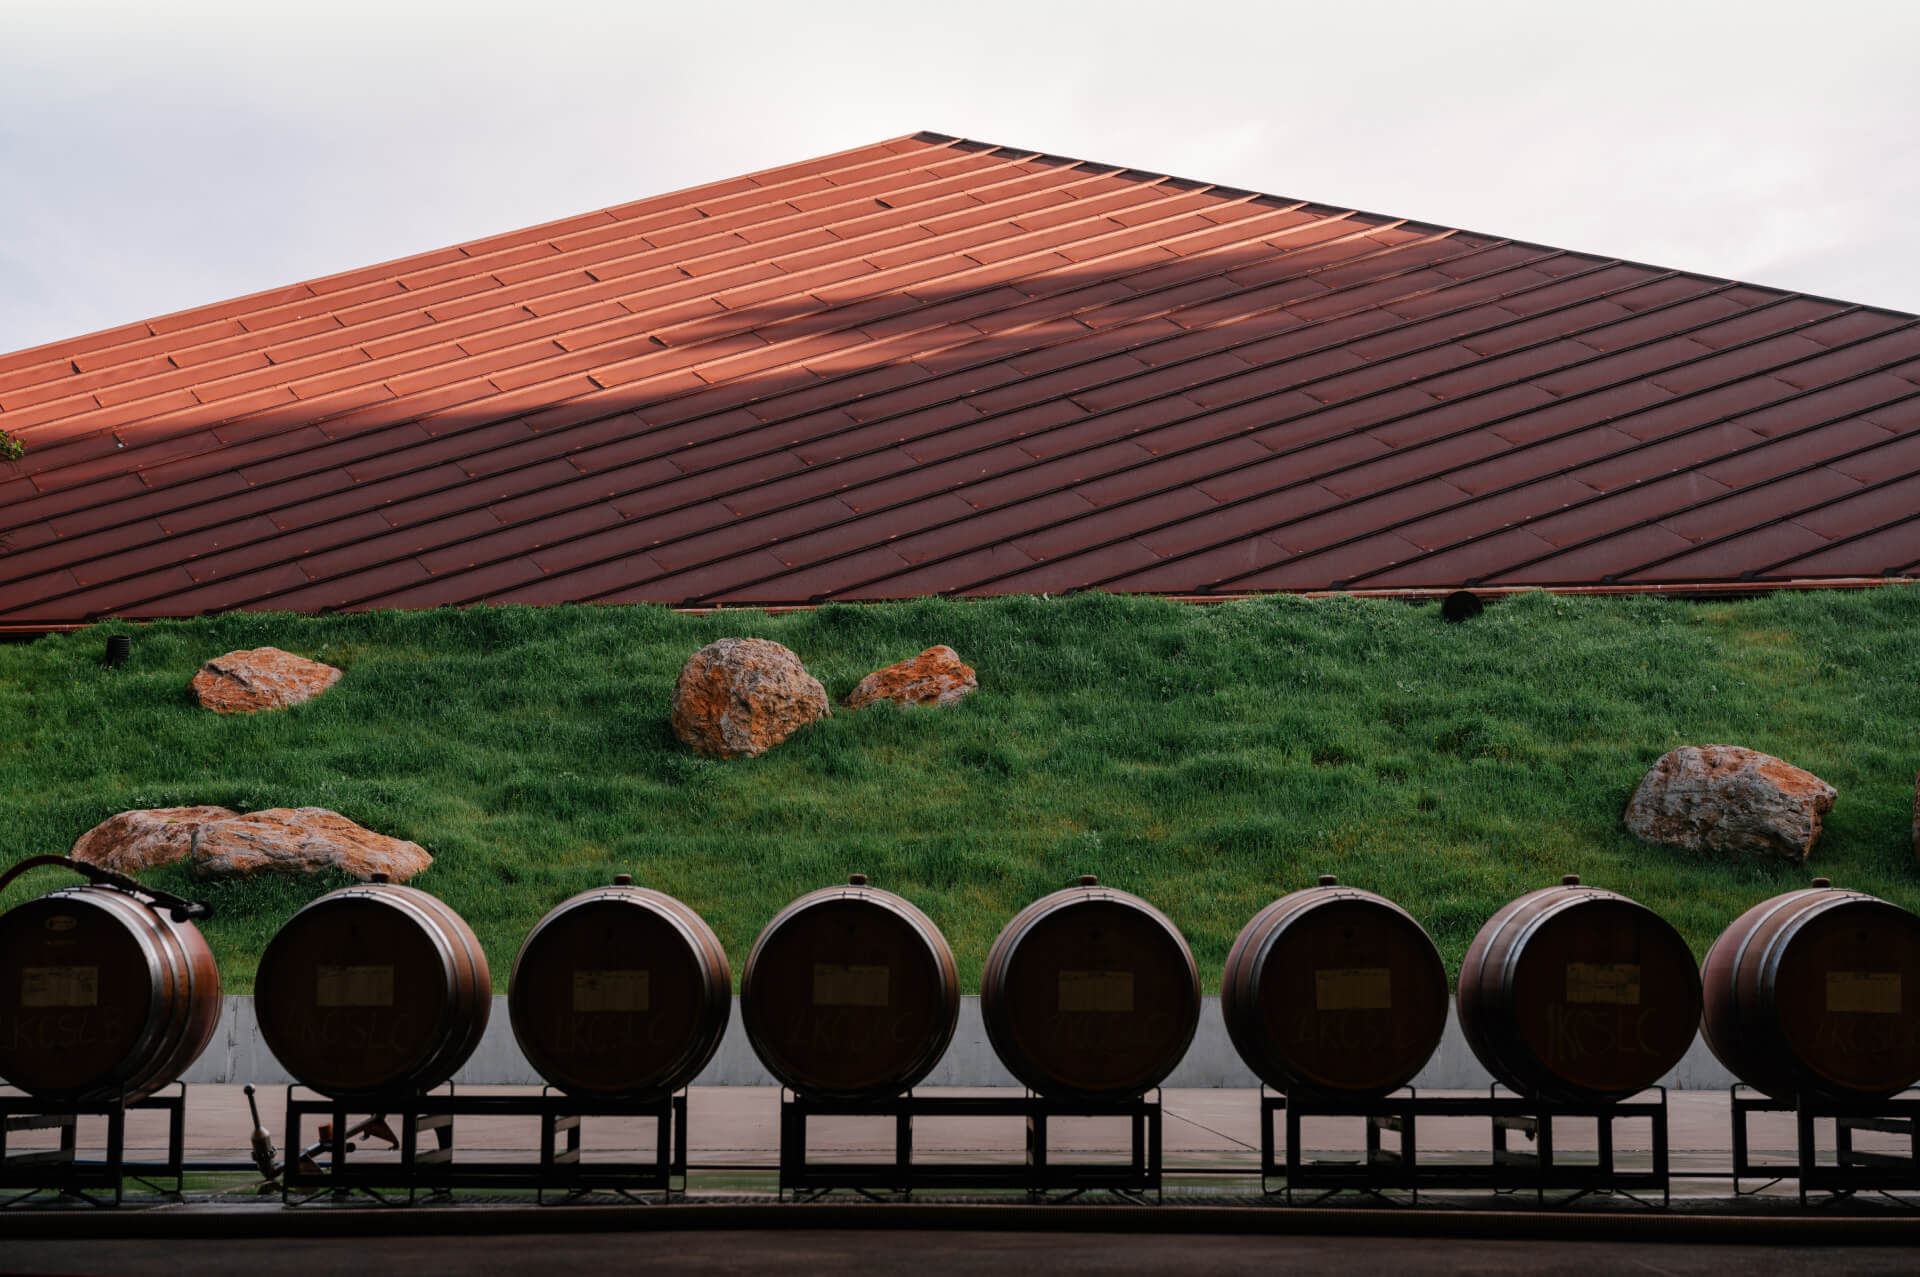 barrels in a row in front of a tile rooftop